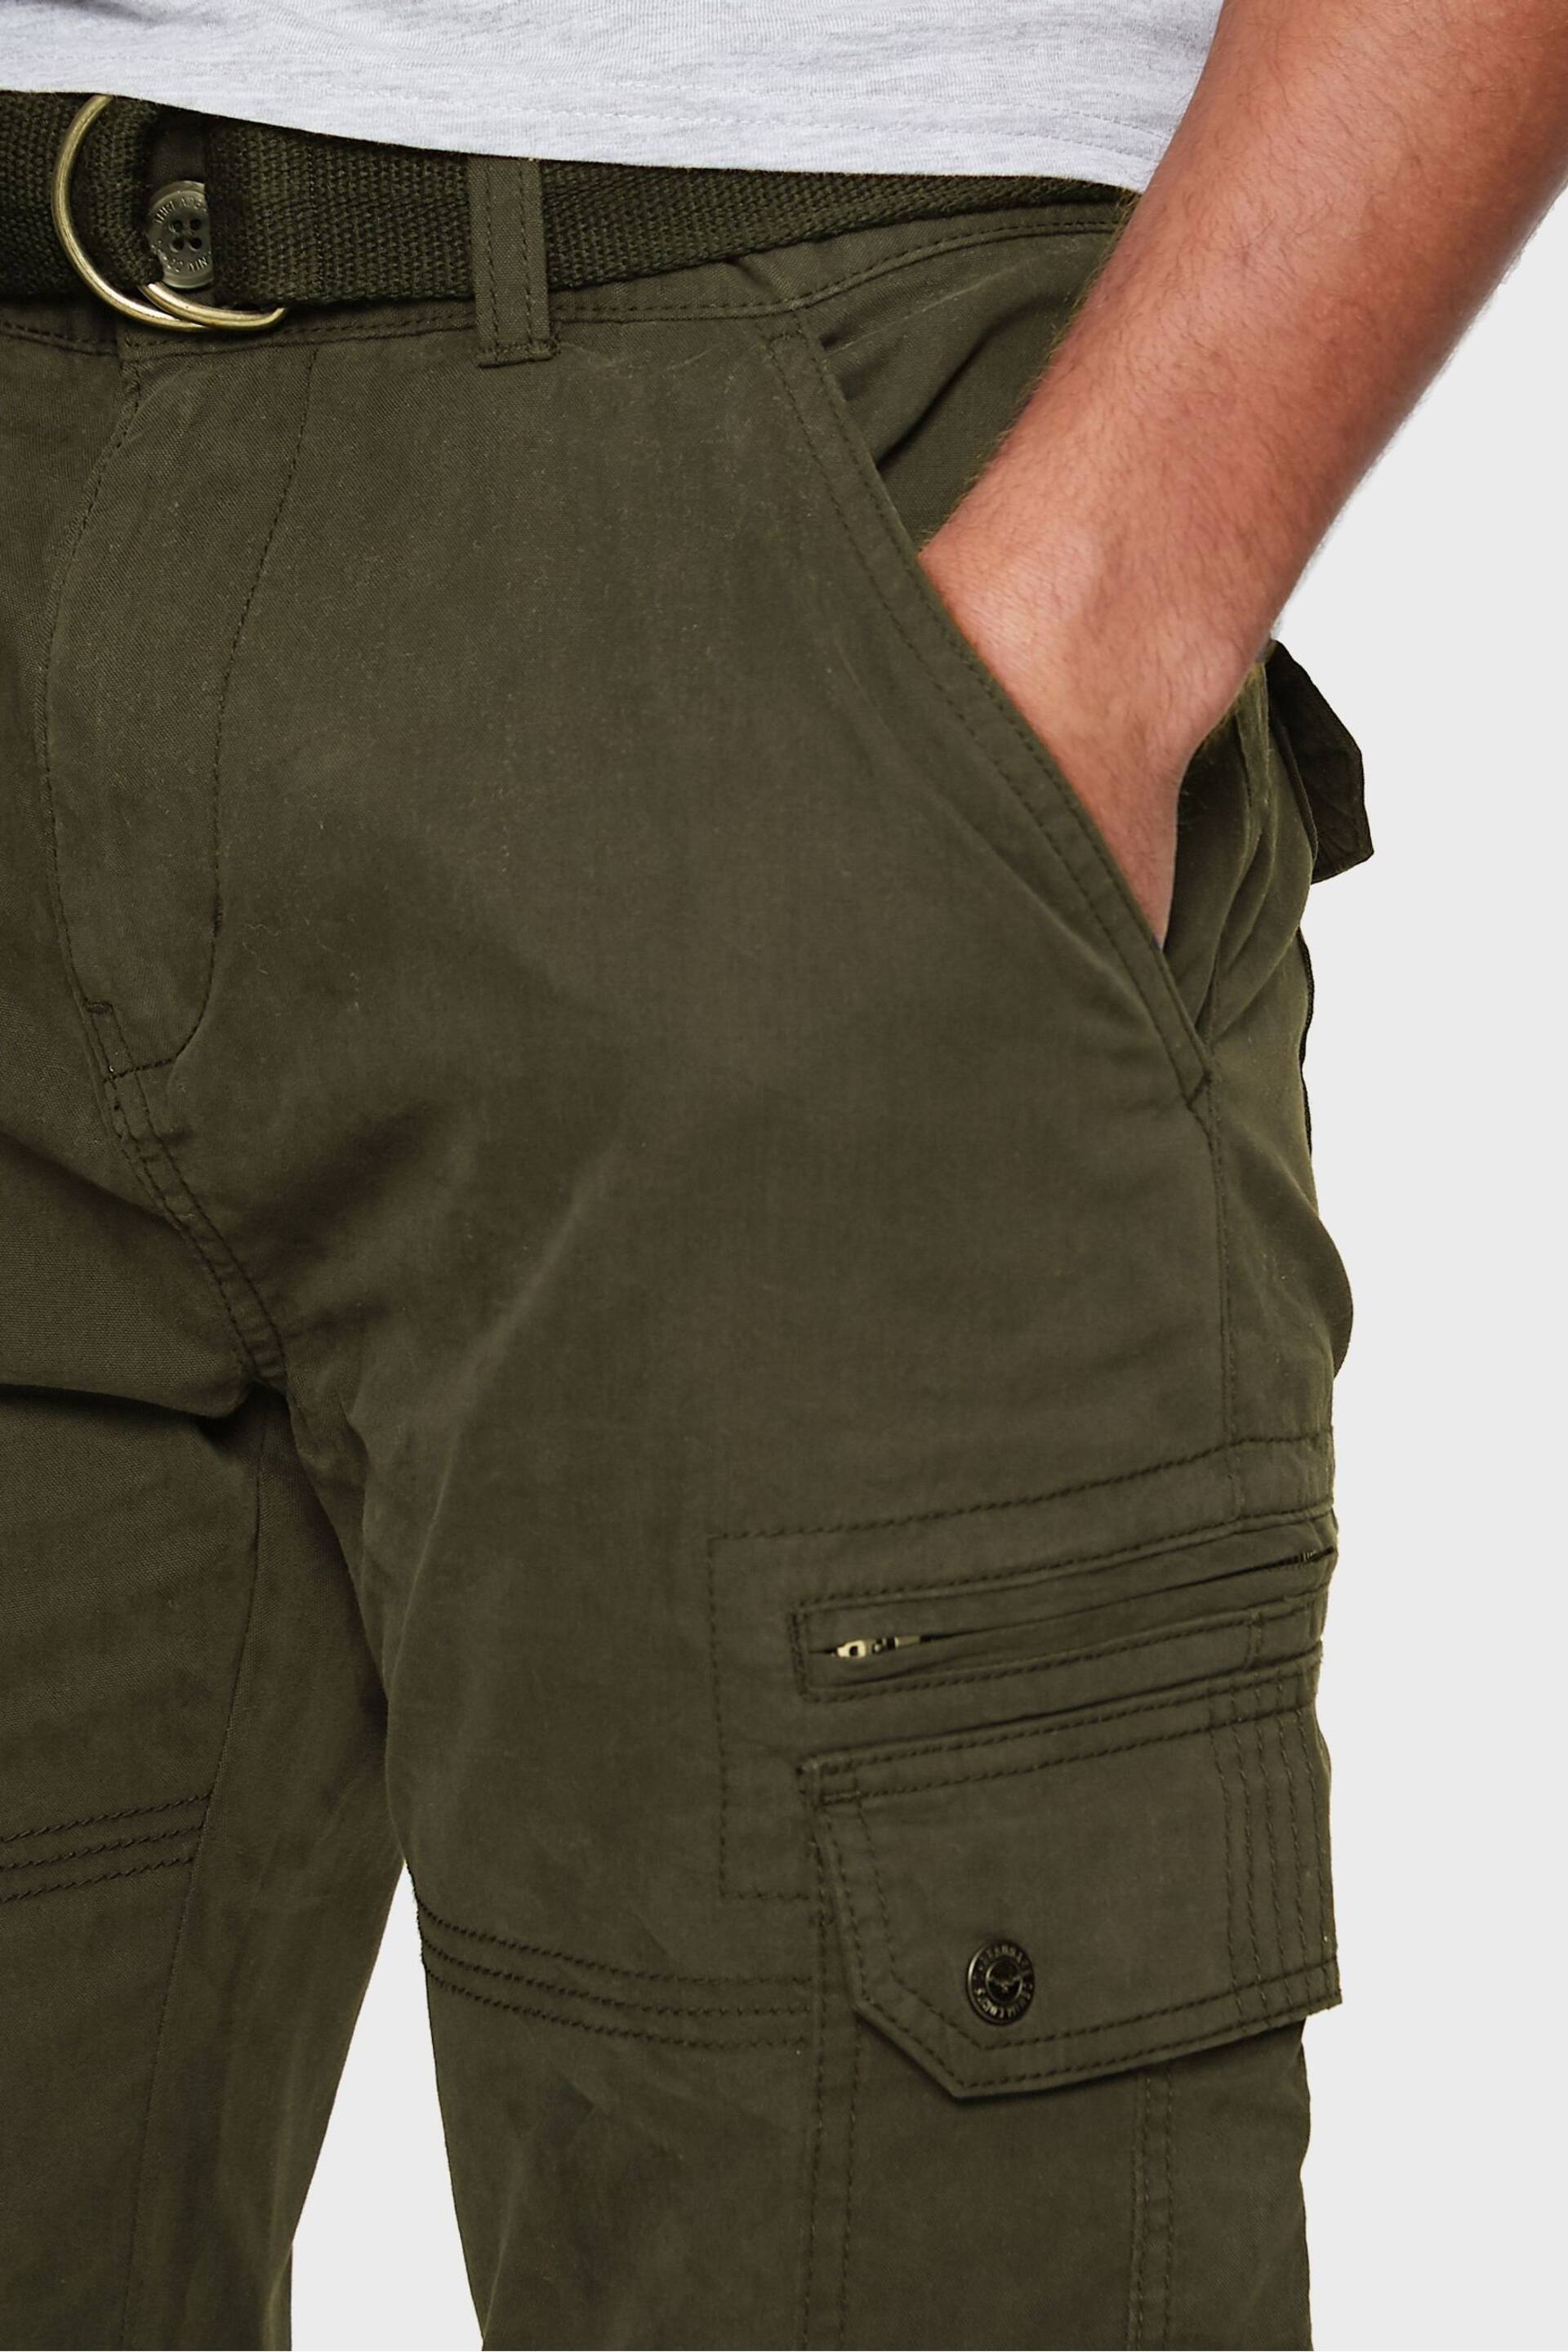 Threadbare Green Cotton Blend Belted Cargo Trousers - Image 4 of 4